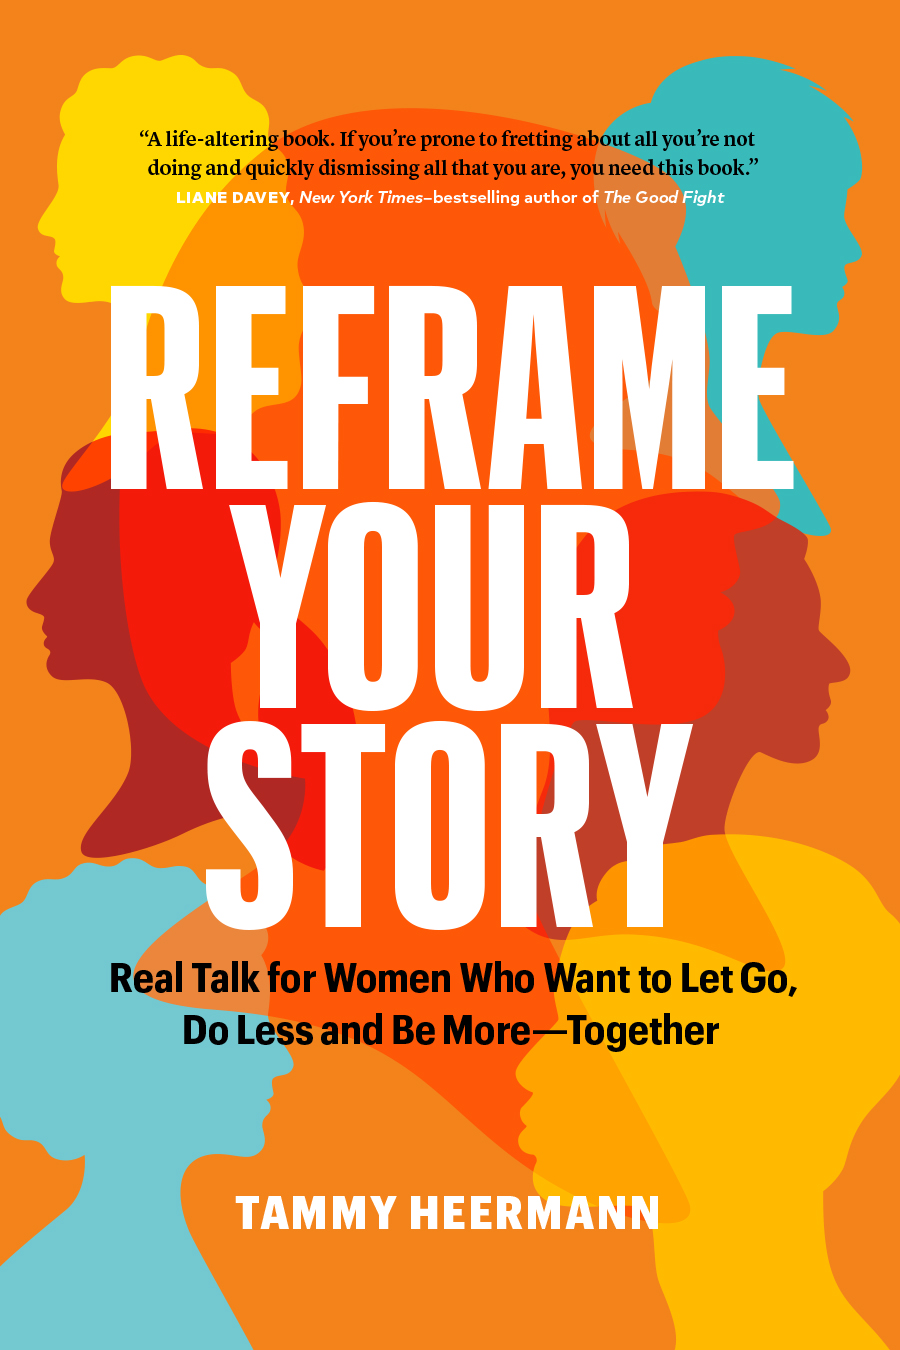 Reframe Your Story by Tammy Heermann